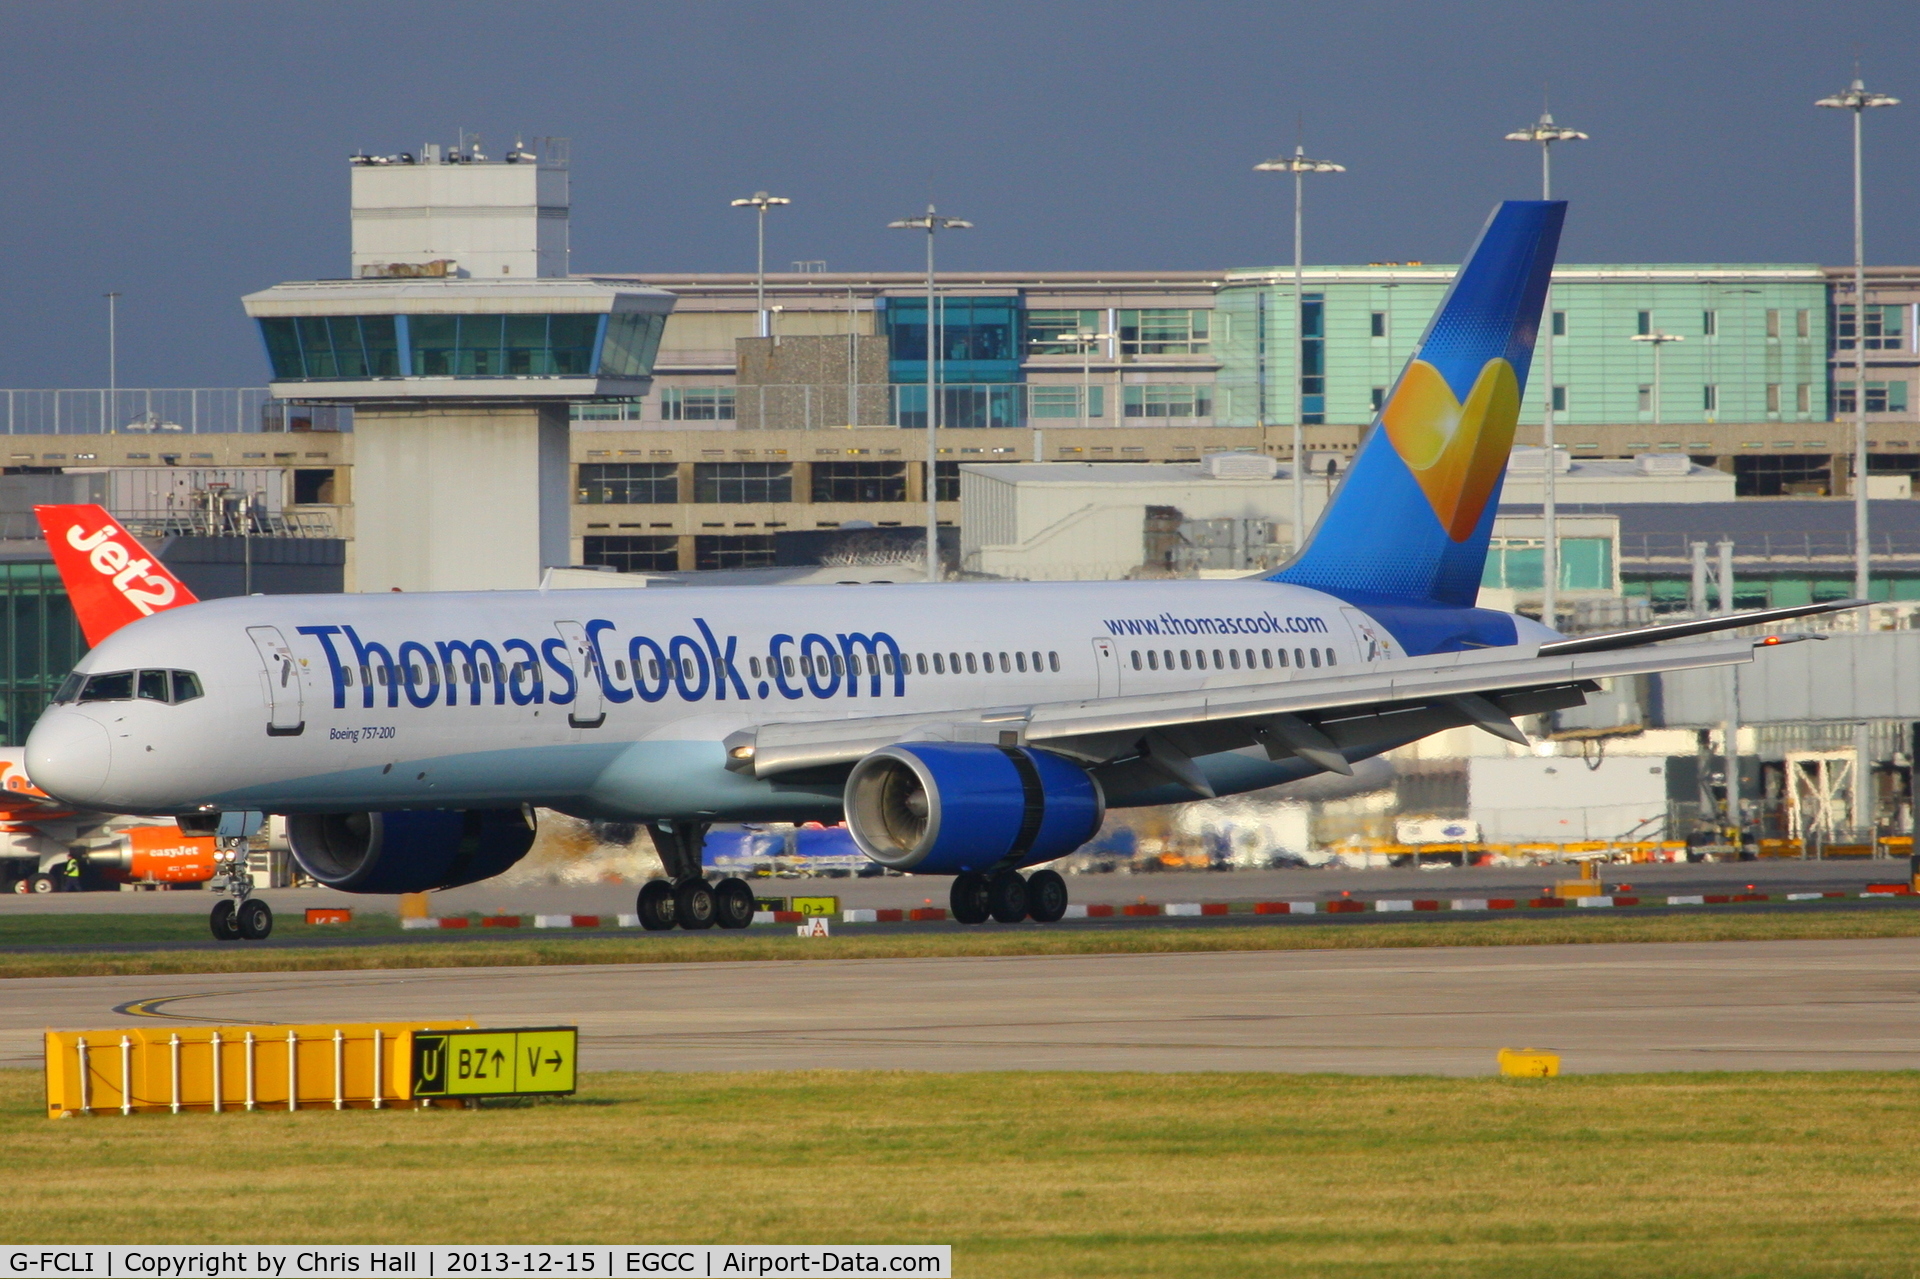 G-FCLI, 1995 Boeing 757-28A C/N 26275, Thomas Cook's new 